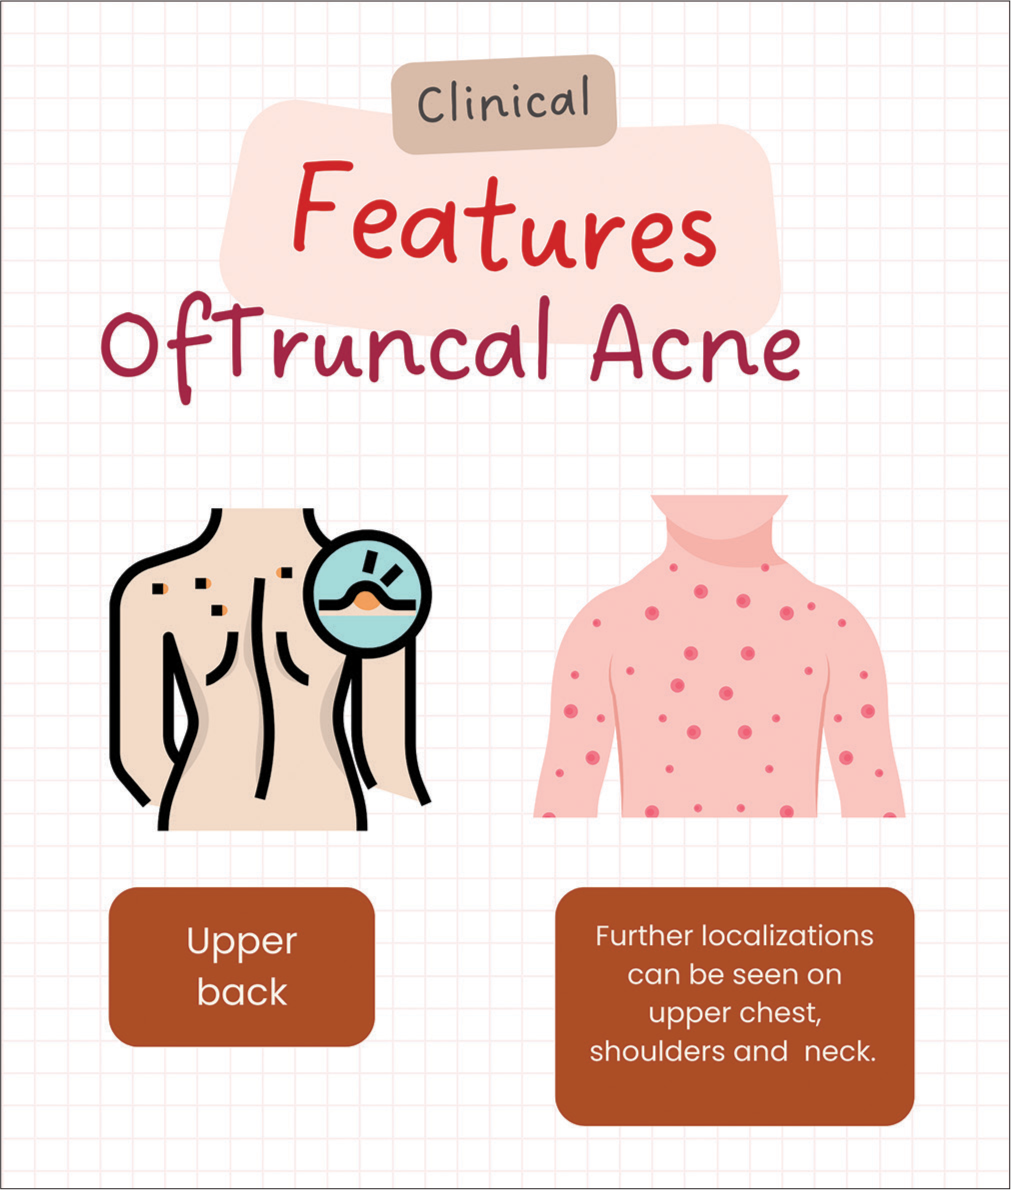 Clinical features of truncal acne. Adapted from Woo and Kim.[5]